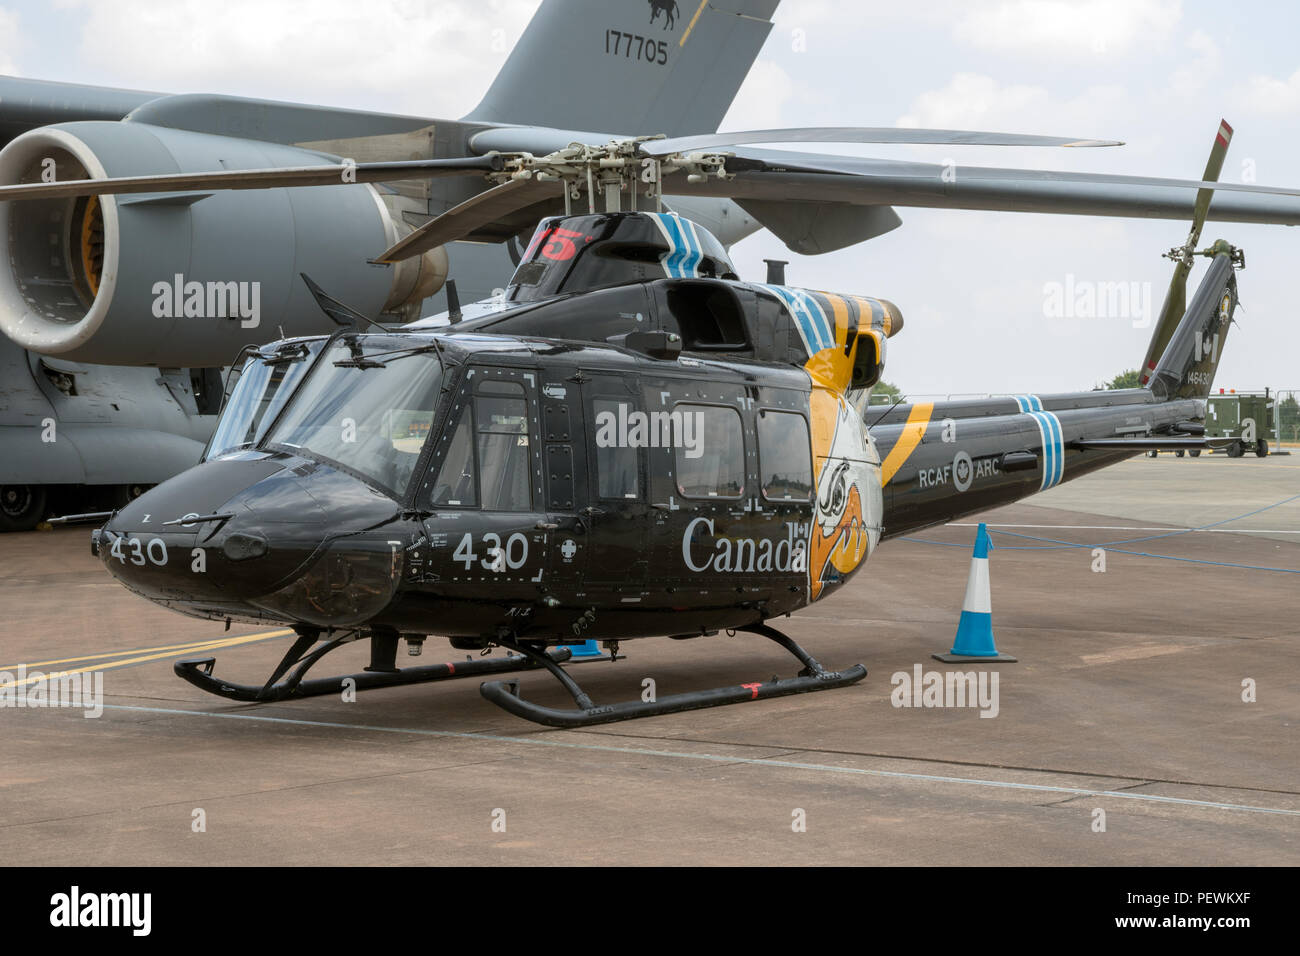 FAIRFORD, UK - JUL 13, 2018: Bell CH-146 Griffon helicopter of the Canadian Armed Forces at RAF Fairford airbase. Stock Photo